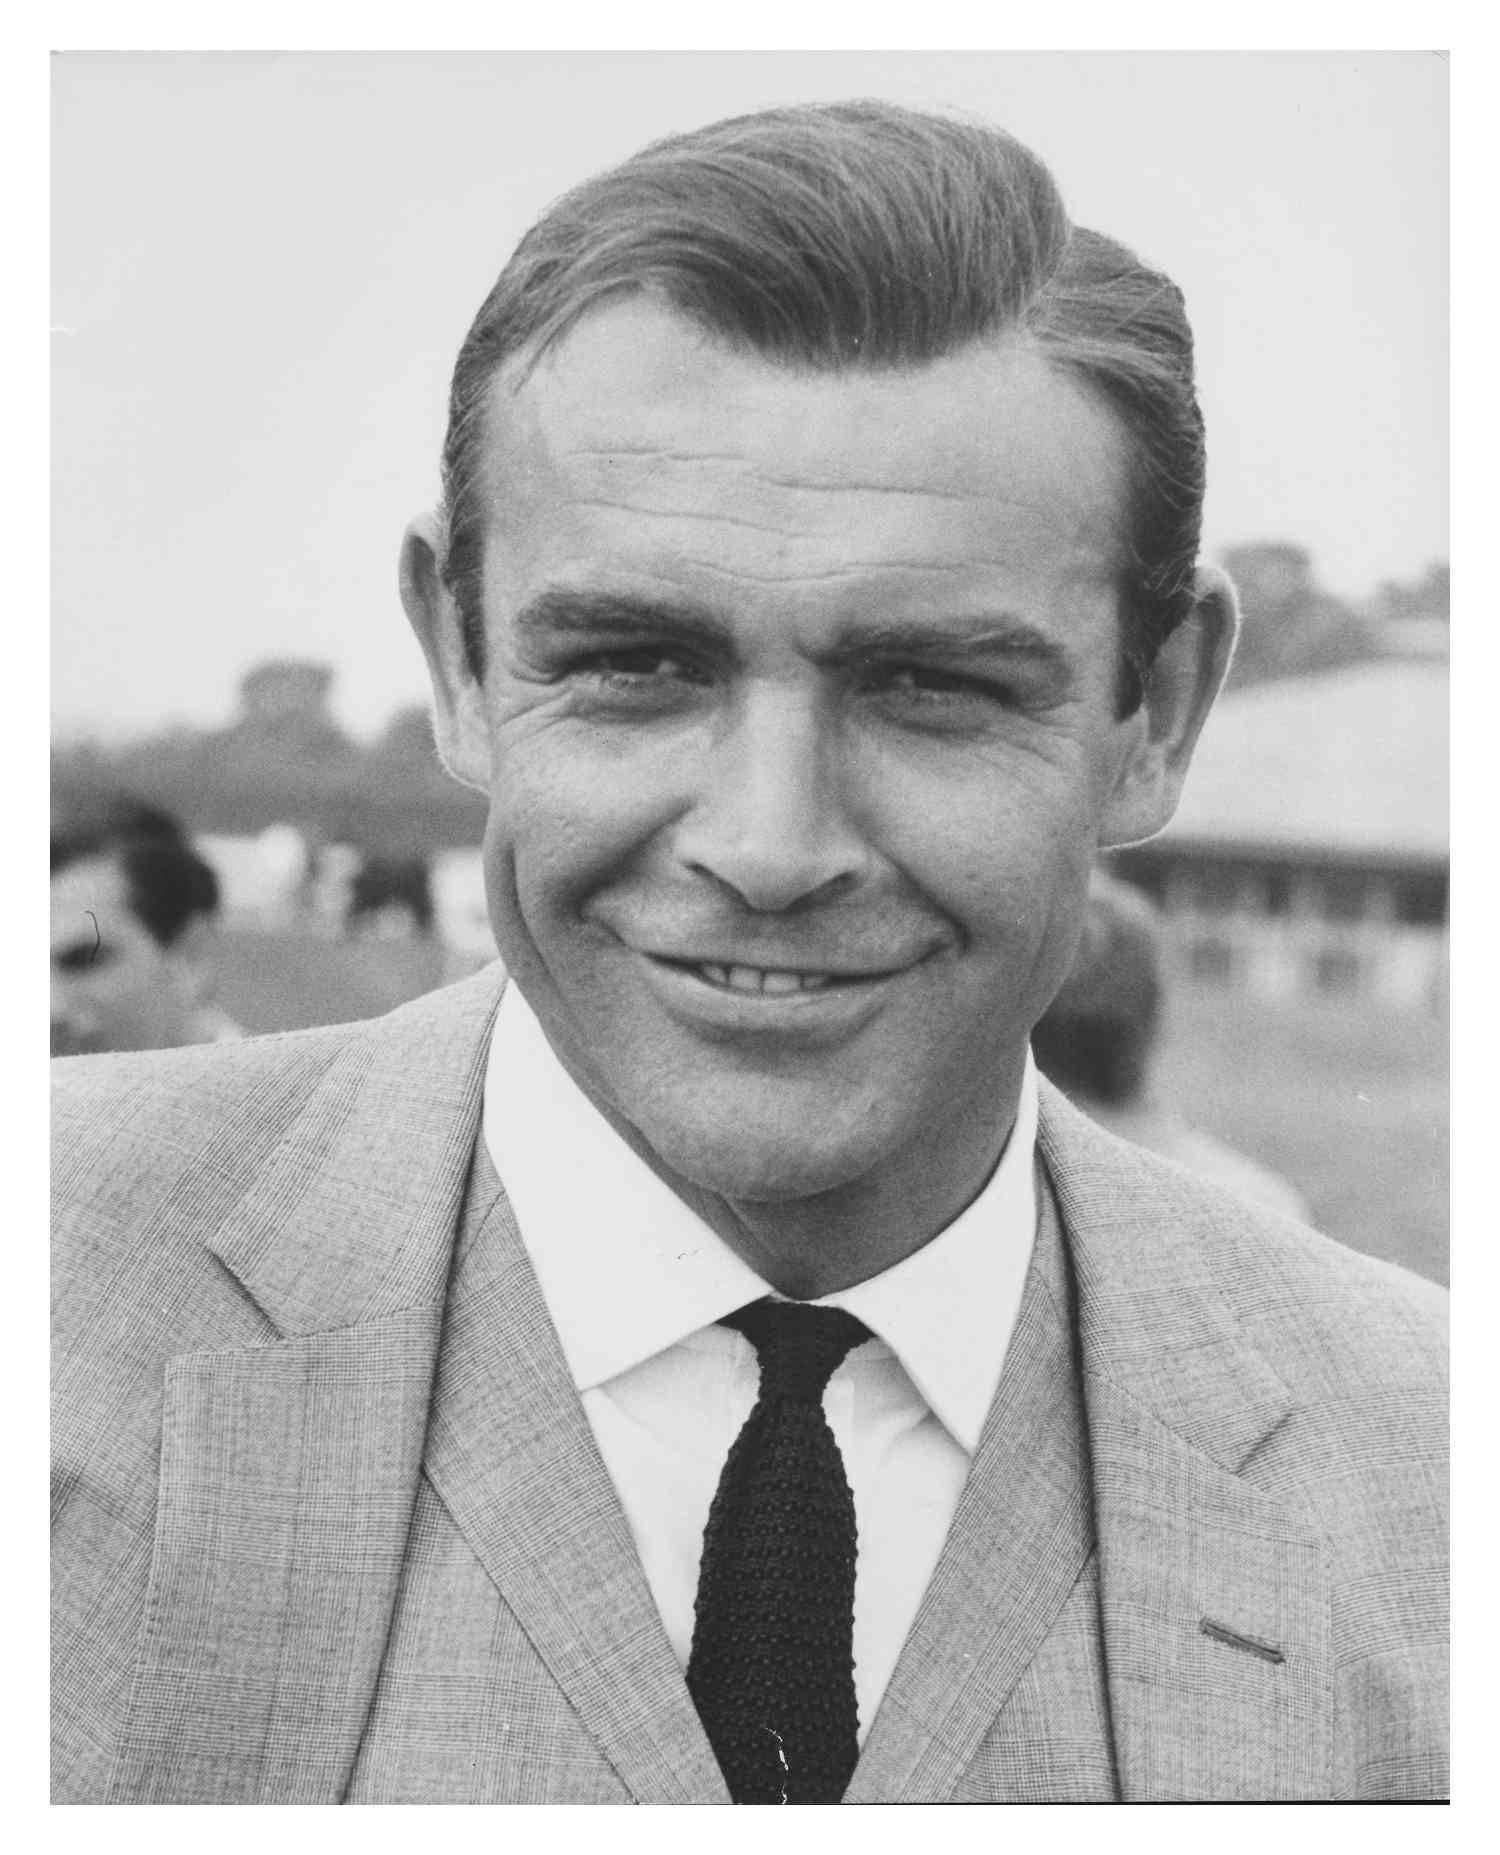 Unknown Portrait Photograph - Sean Connery on the Set as "007" Fine Art Print